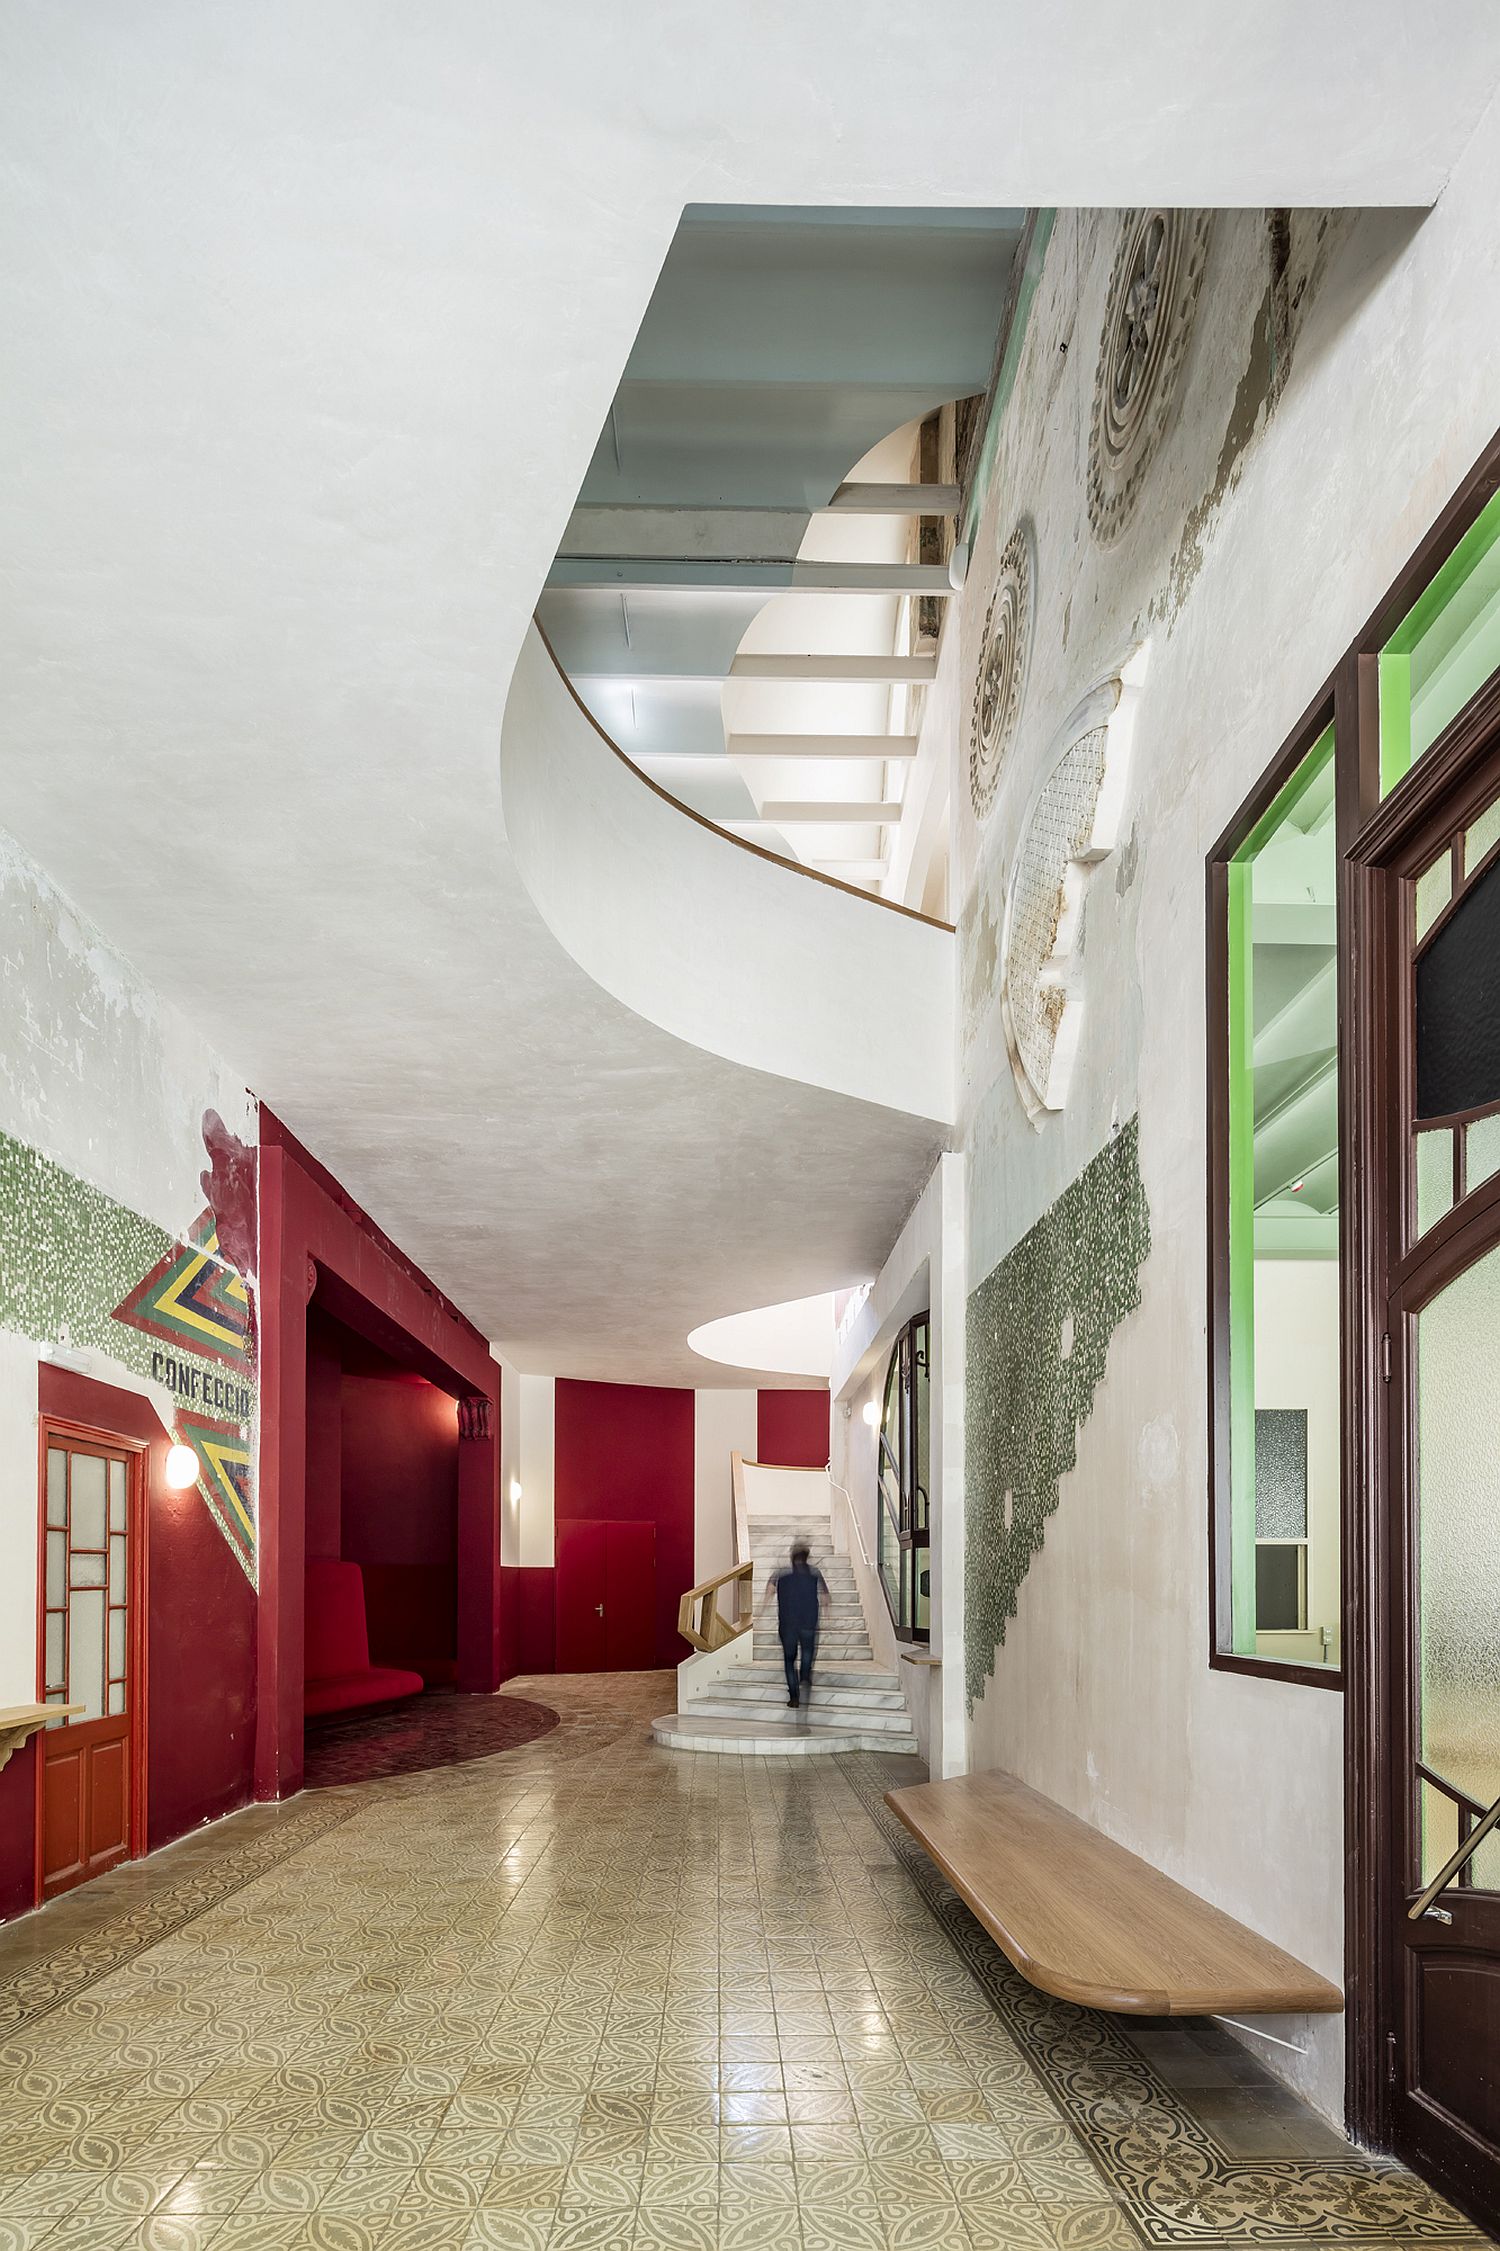 Old-meets-new-inside-this-Barcelona-community-center